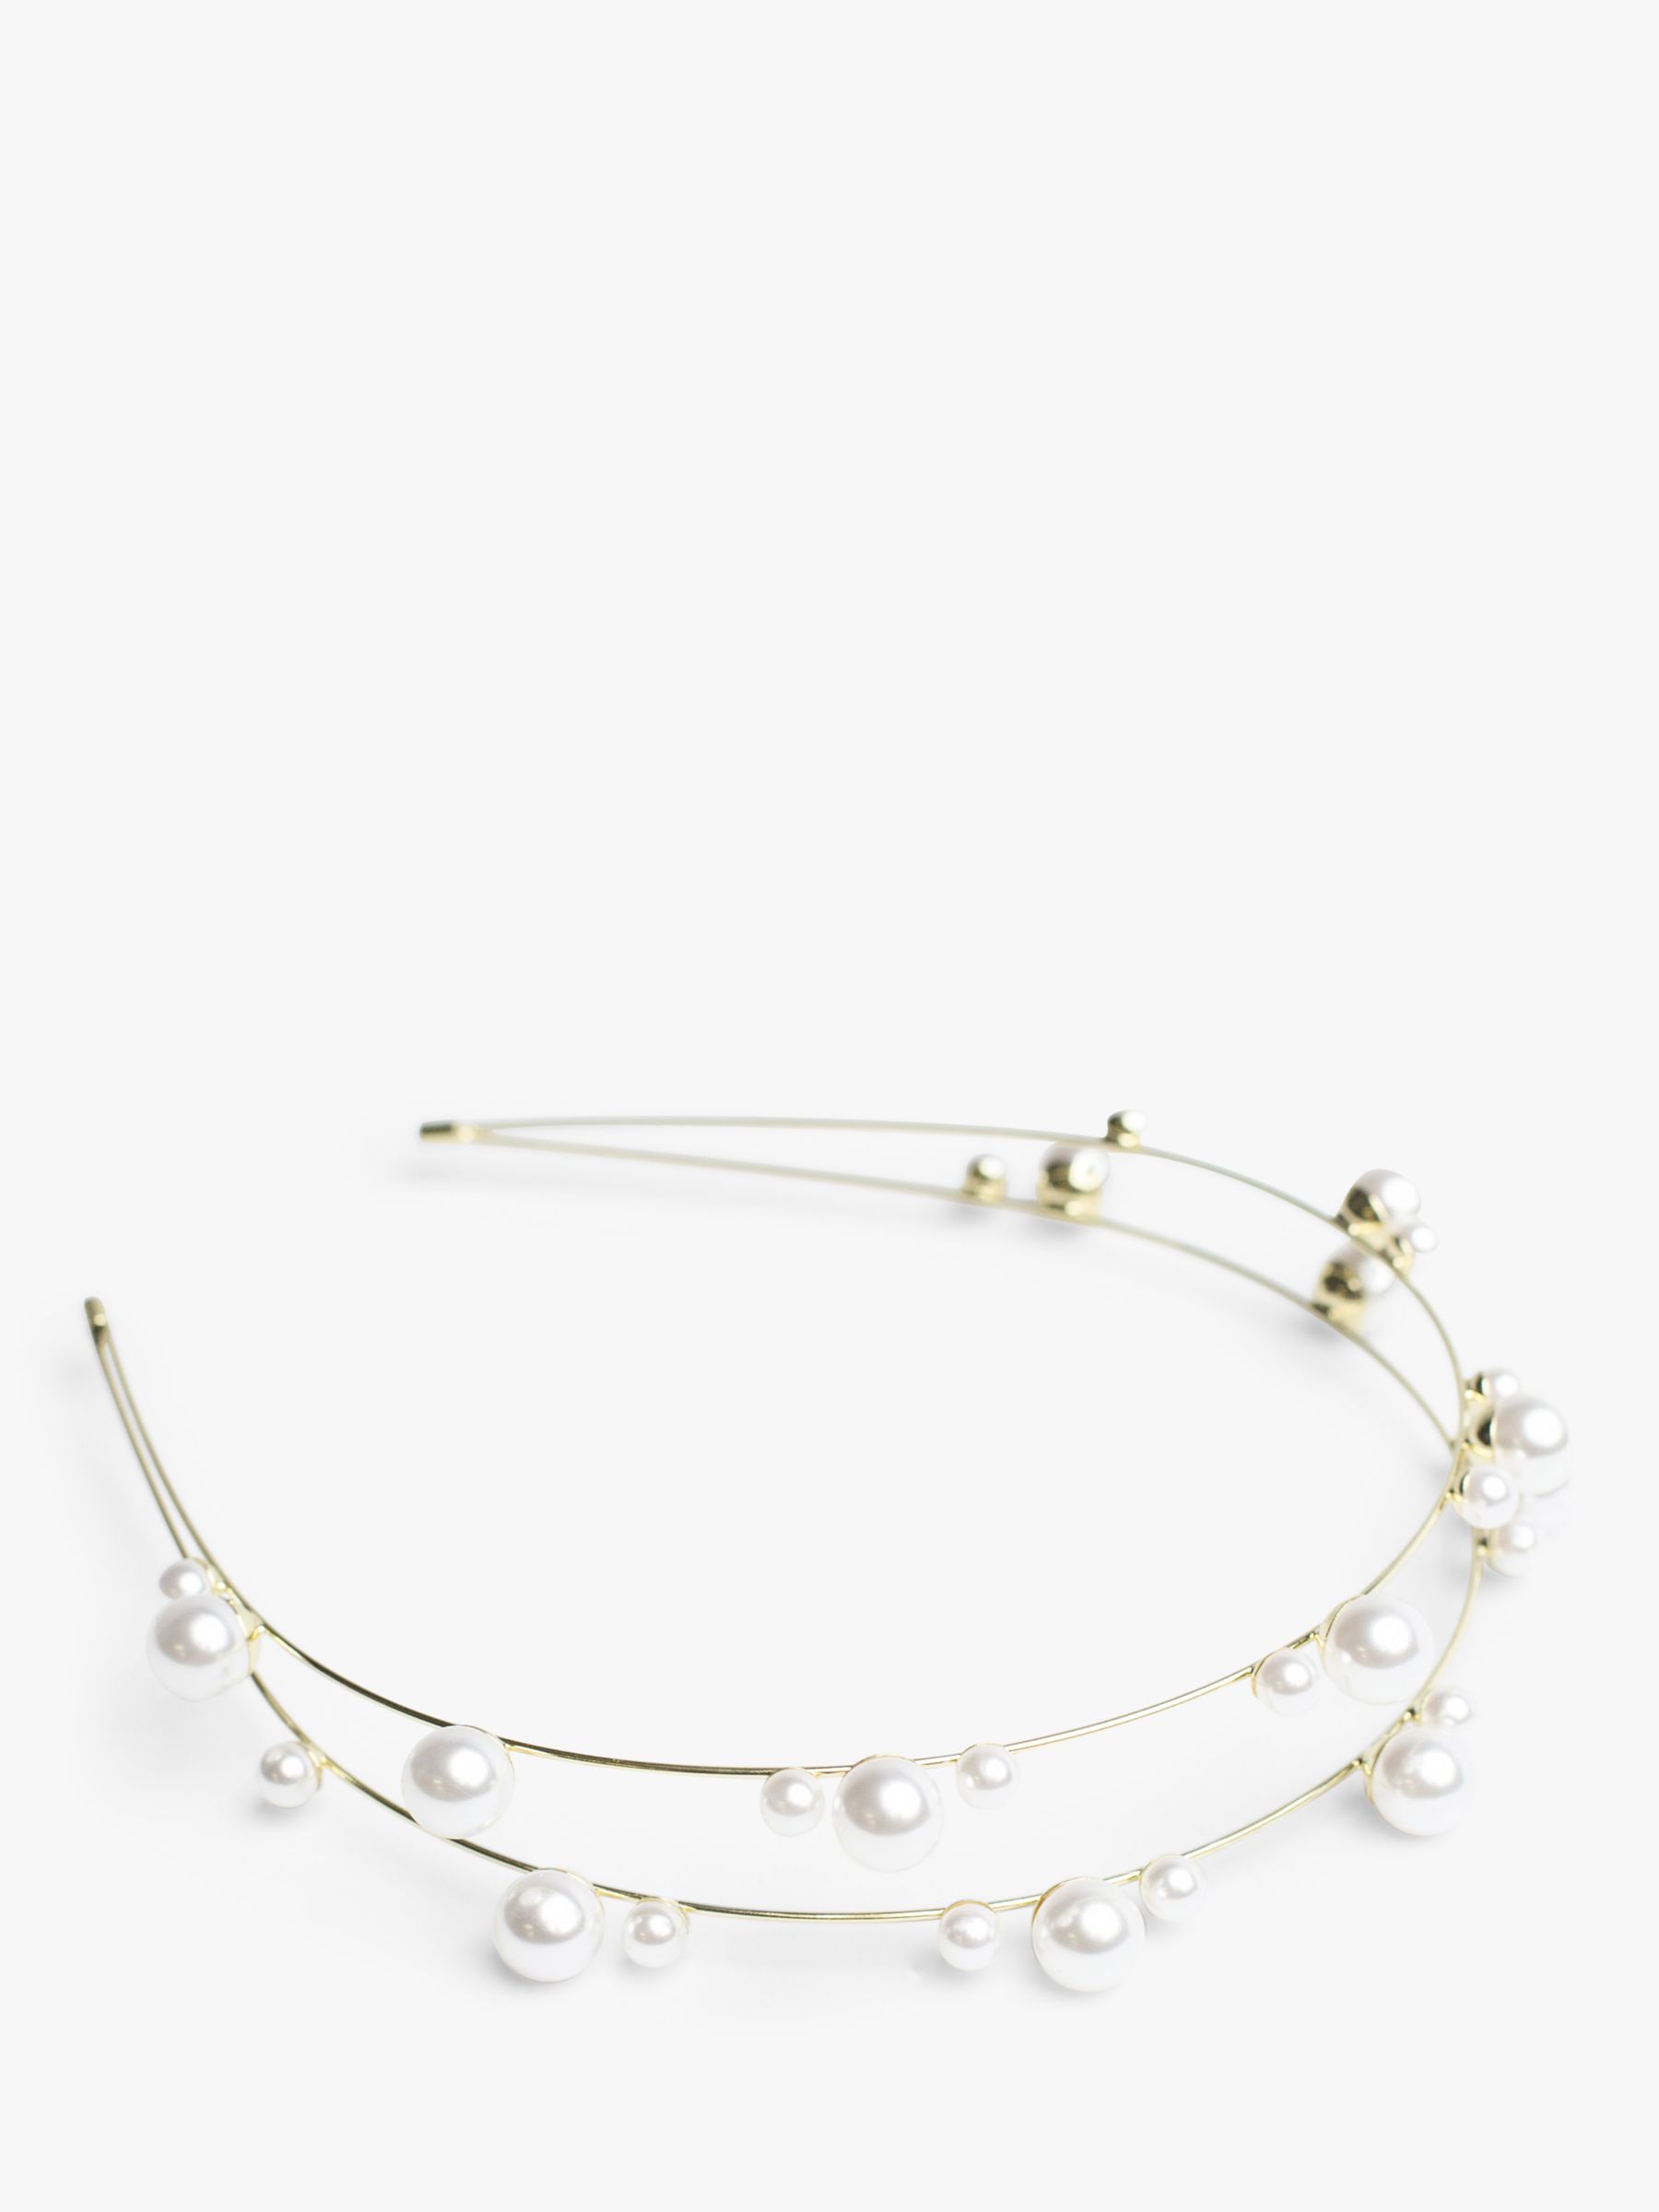 Bloom & Bay Lavender Double Row Pearl Headband, Gold/Cream, One Size